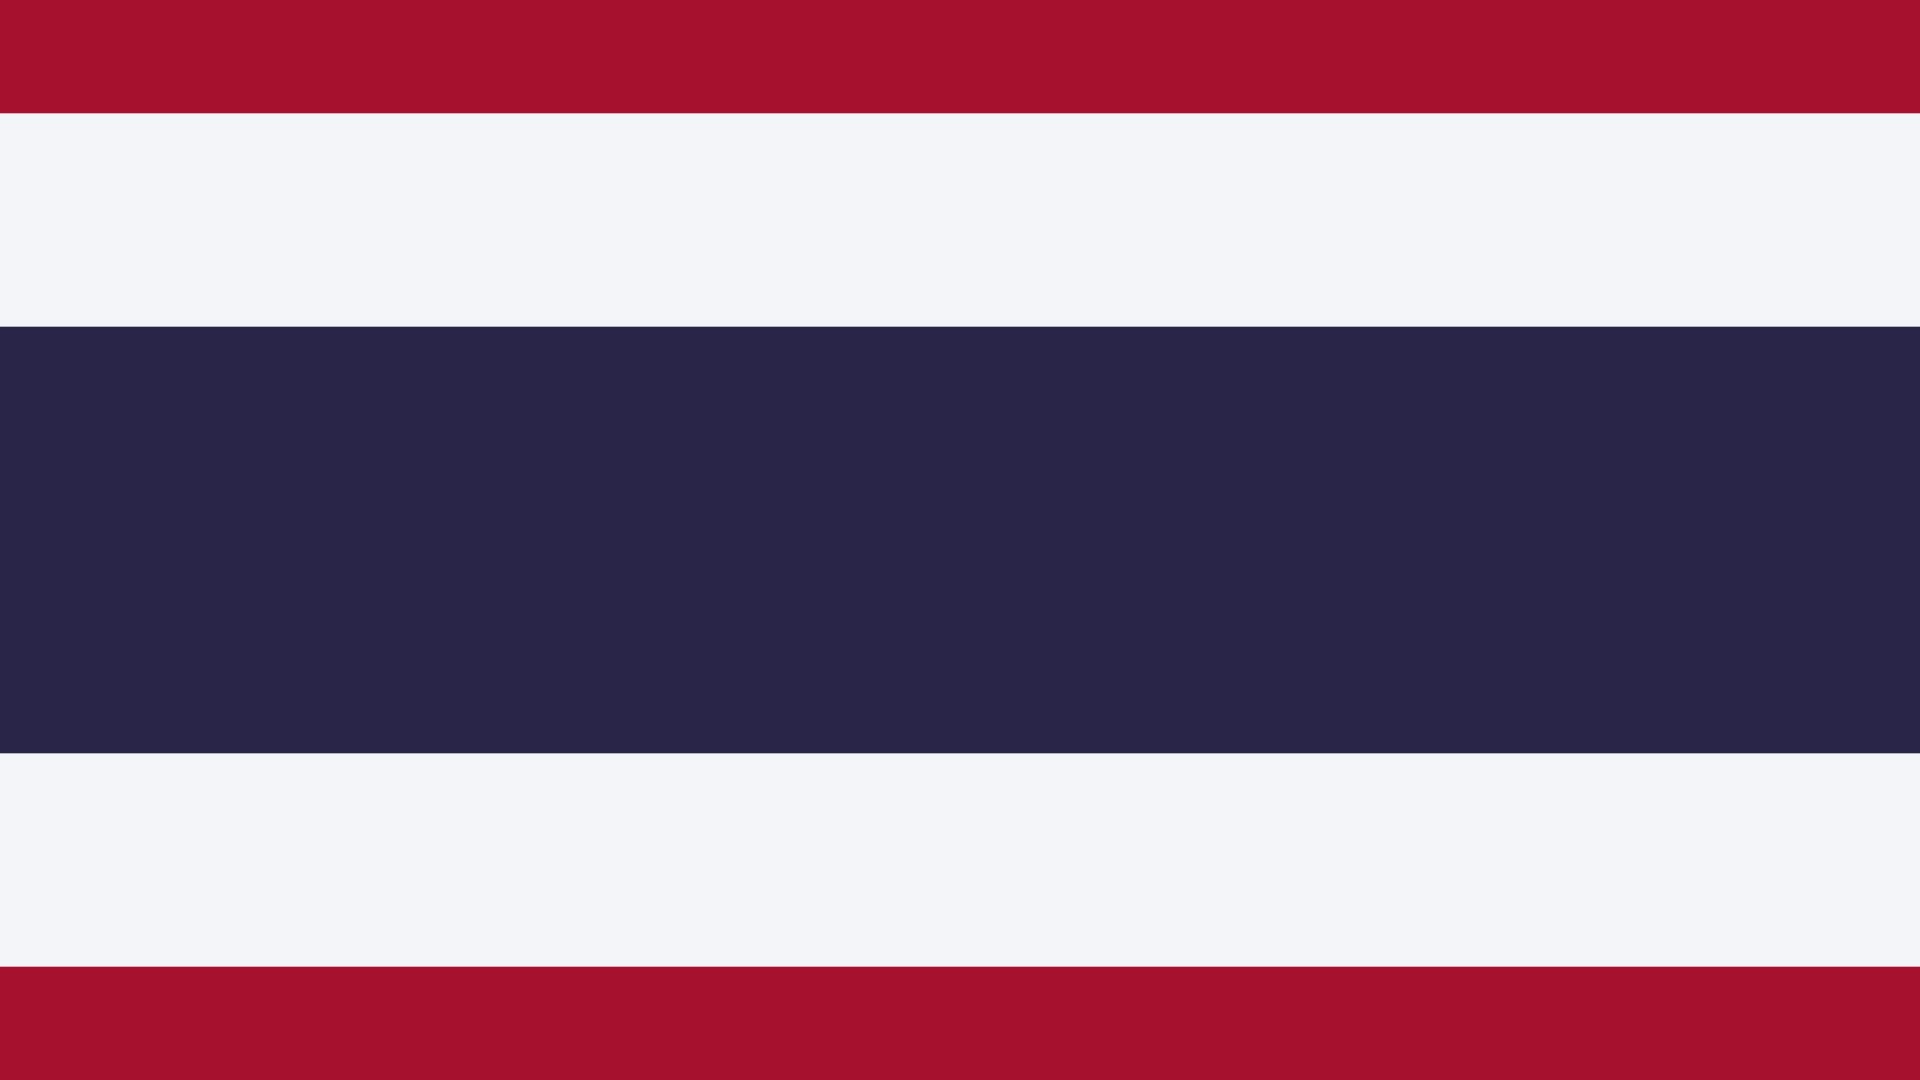 An image of the flag of Thailand